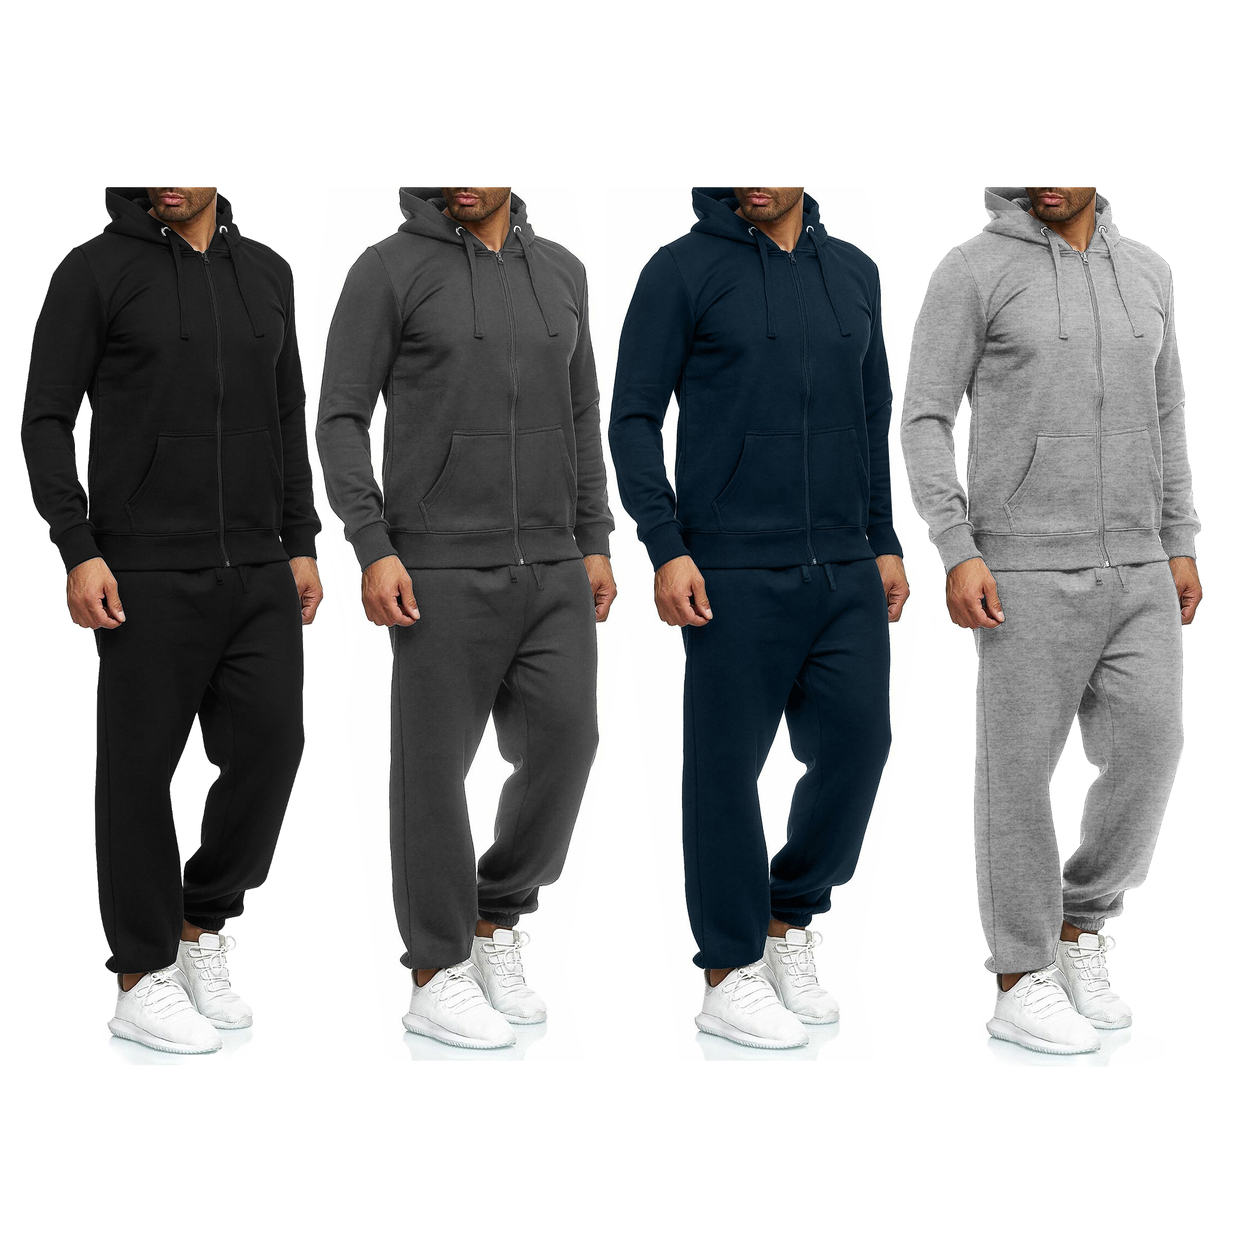 Multi-Pack: Men's Casual Big & Tall Athletic Active Winter Warm Fleece Lined Full Zip Tracksuit Jogger Set - Navy, 1-pack, Large